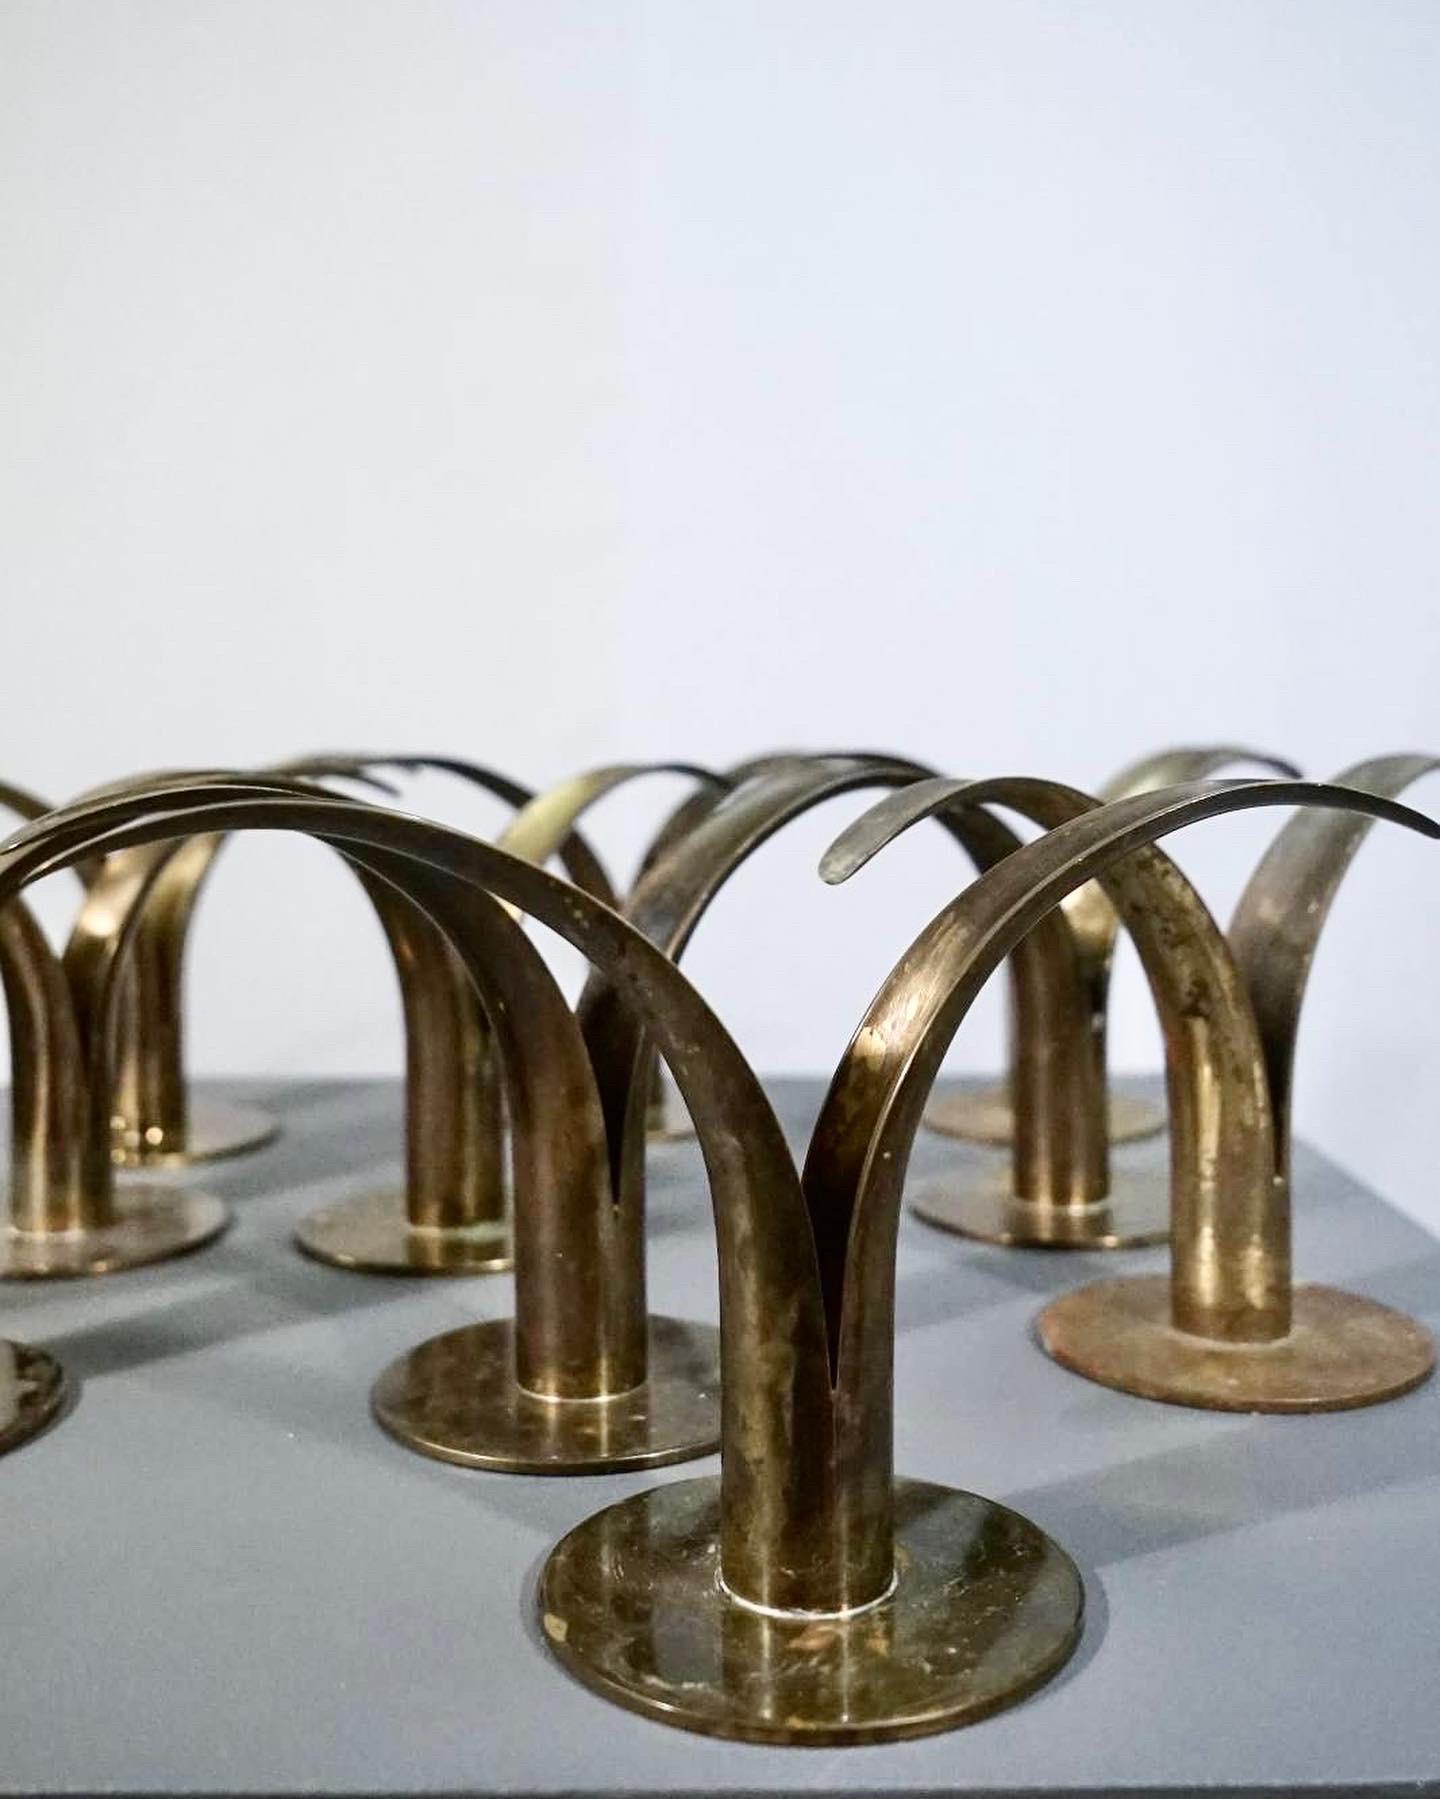 Rare set of 10 lily candle holders in patinaed brass designed by Ivar Ålenius Björk for Ystad Metal.
The candle holders are in good original condition with a beautiful patina.
Set of 10 available but we got more in stock if wanted.